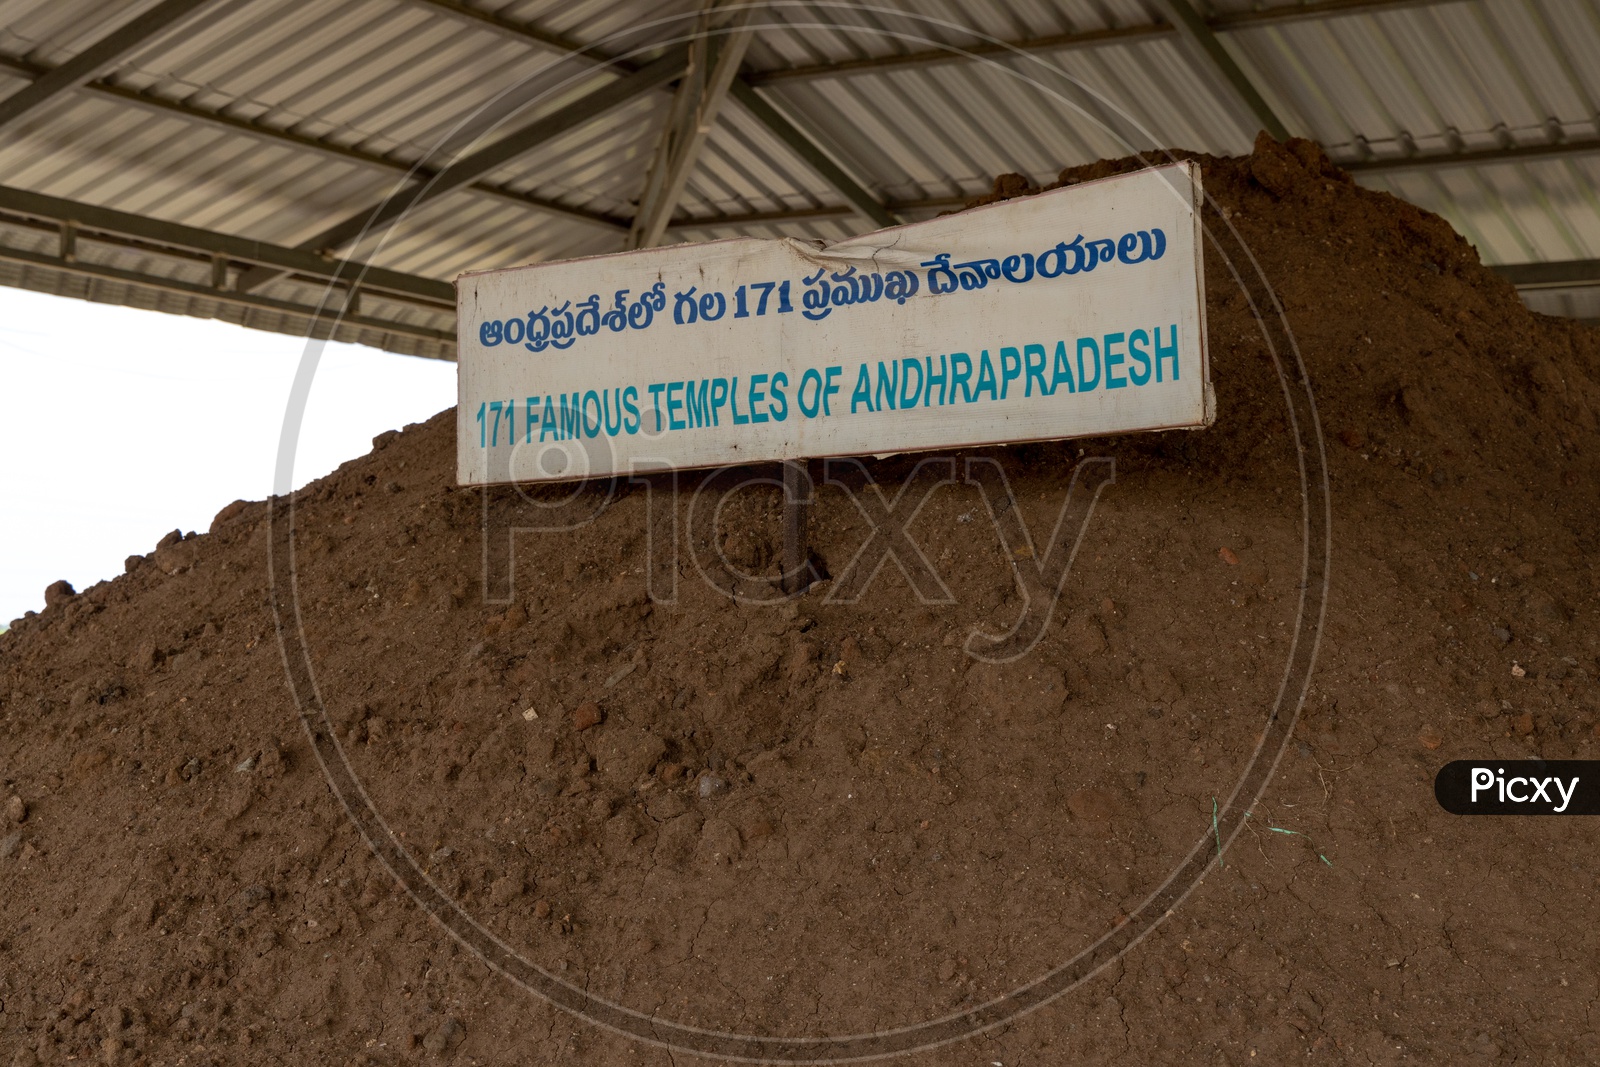 Sacred Mud from 171 famous temples of AP for the construction of Andhra Pradesh Capital Amaravati